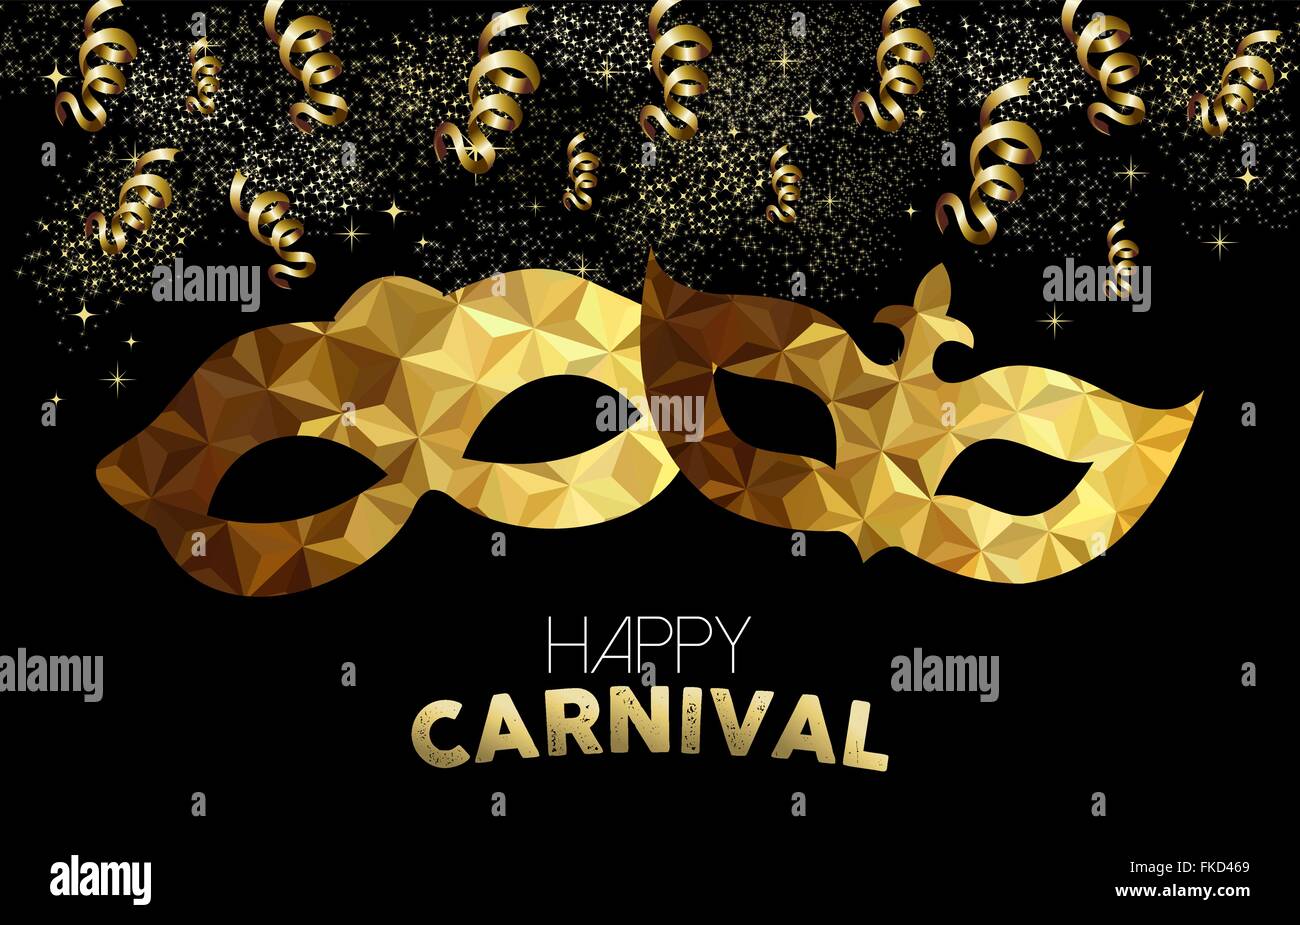 Golden carnival design. Low poly masks with text, gold party streamers and confetti. EPS10 vector. Stock Vector